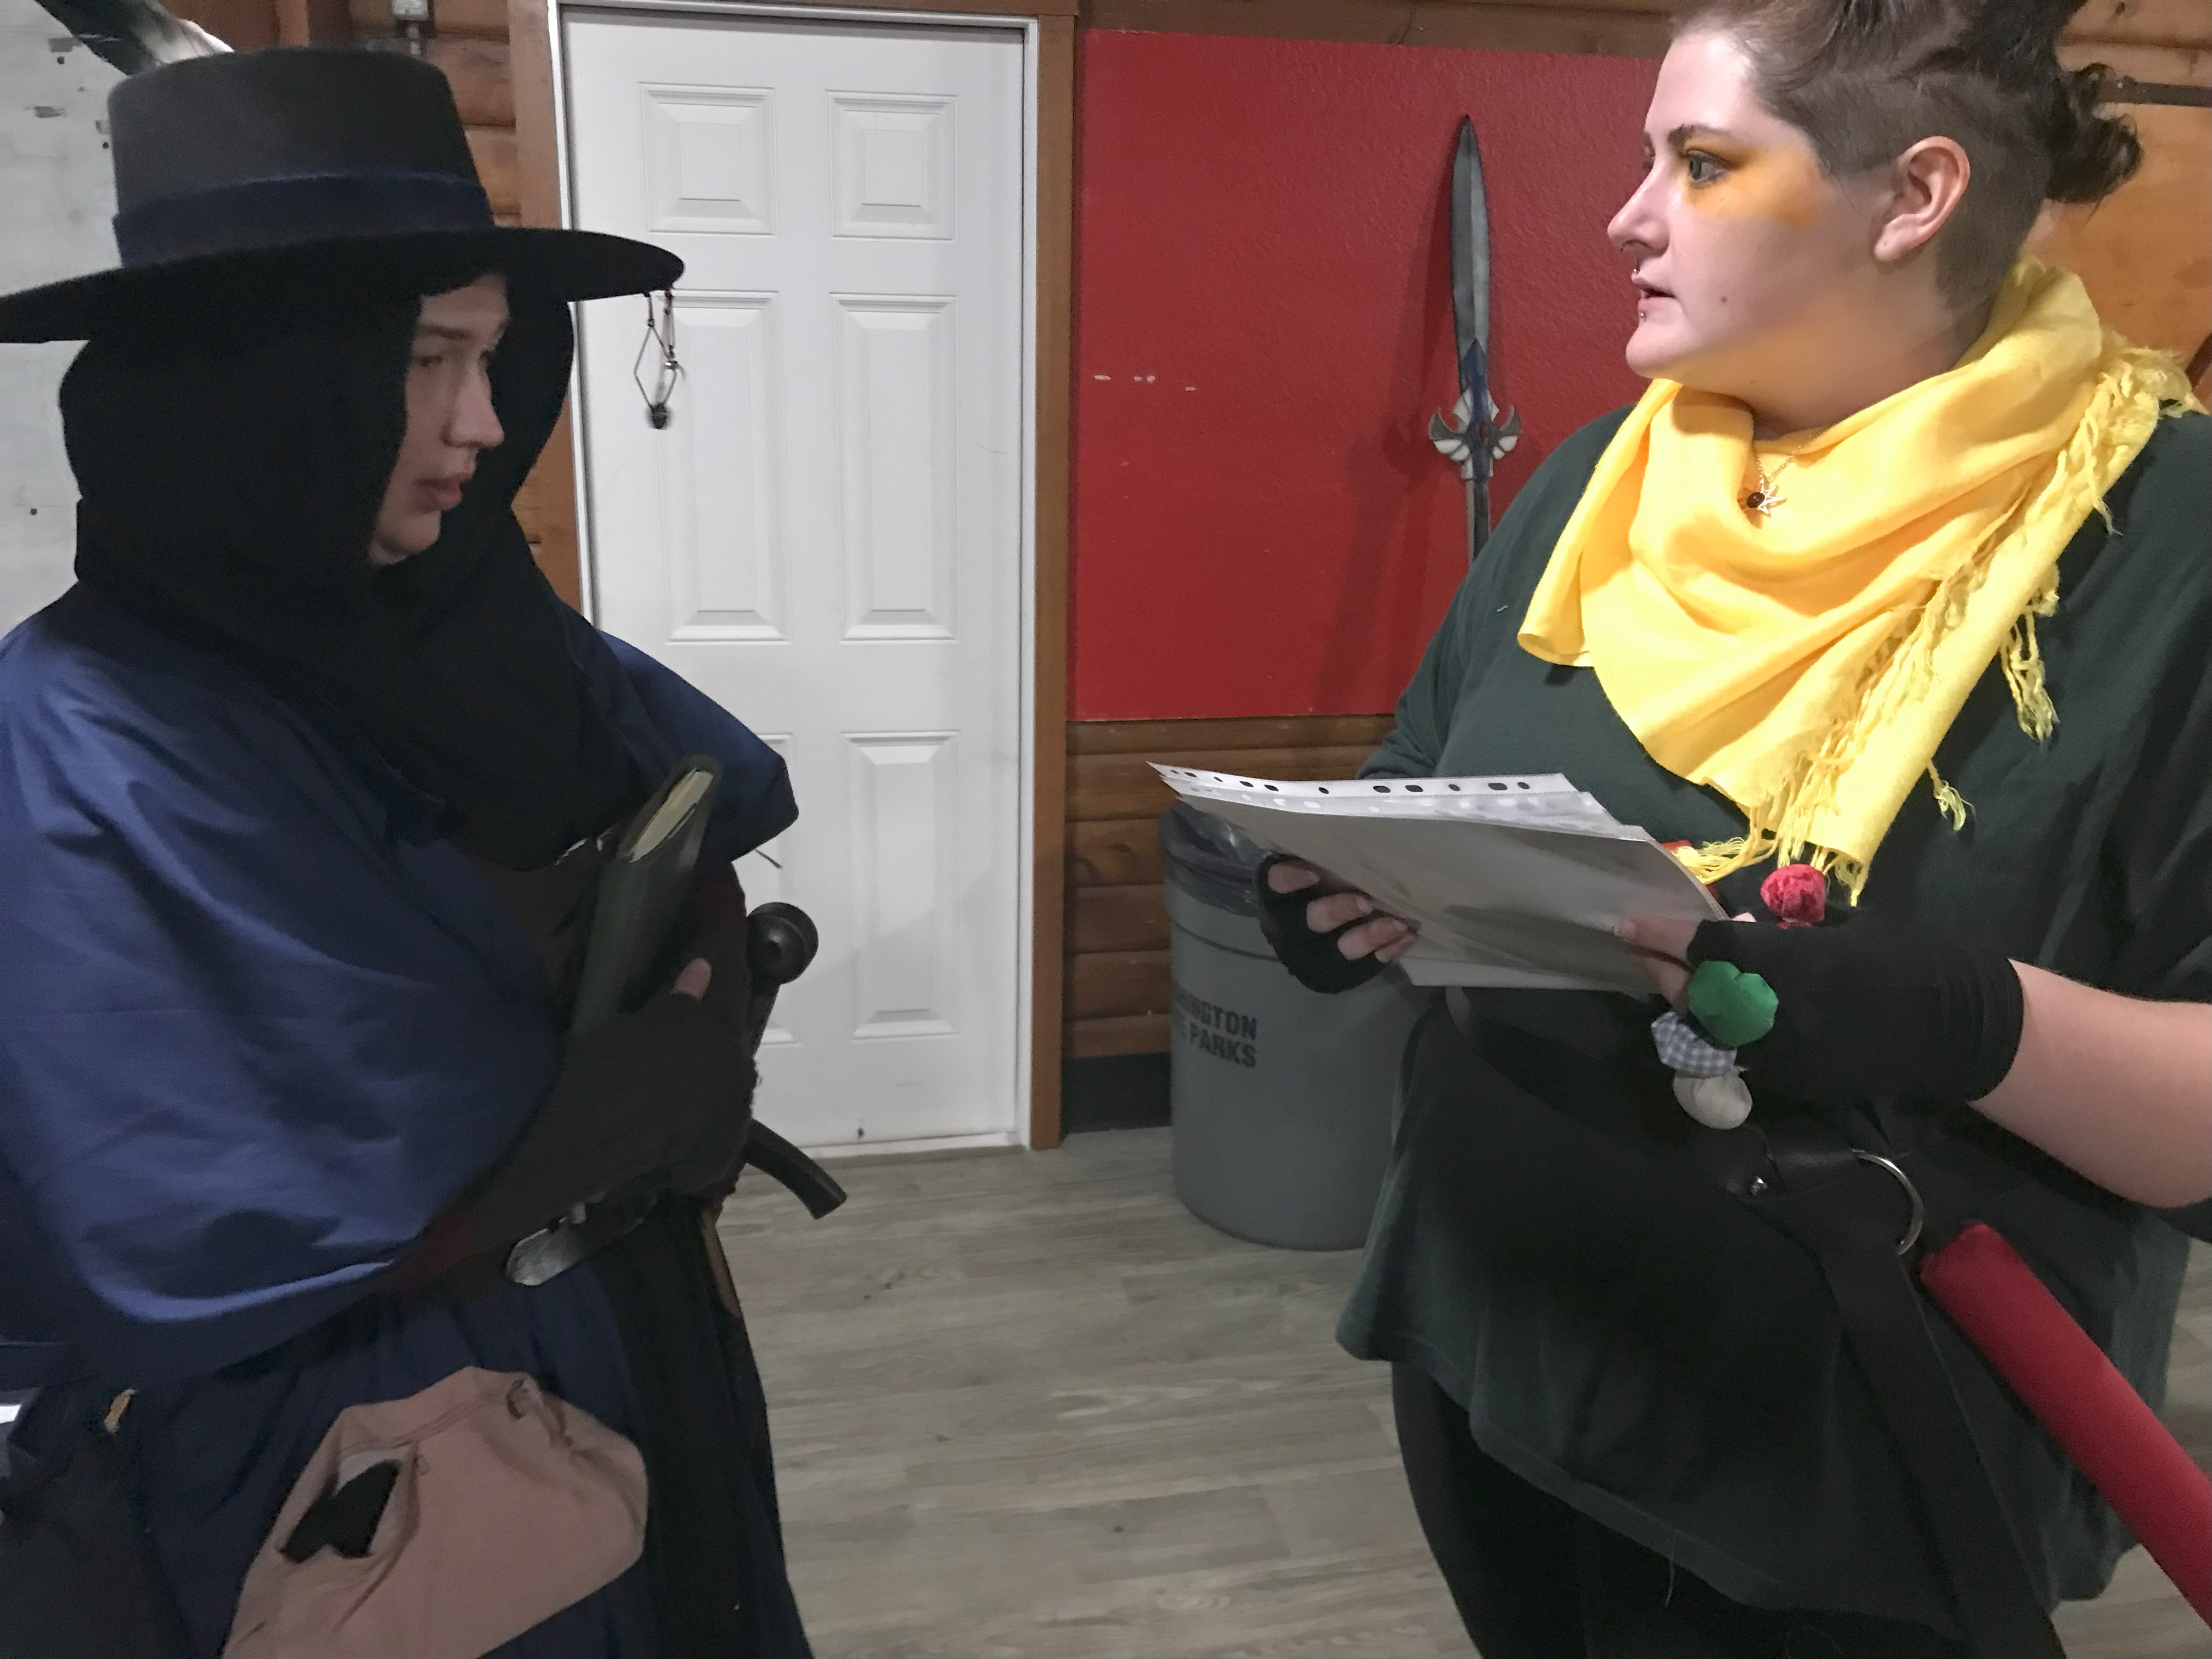 A person in a black hat and blue cloak speaks to a person in green and yellow, photo by Ryan W